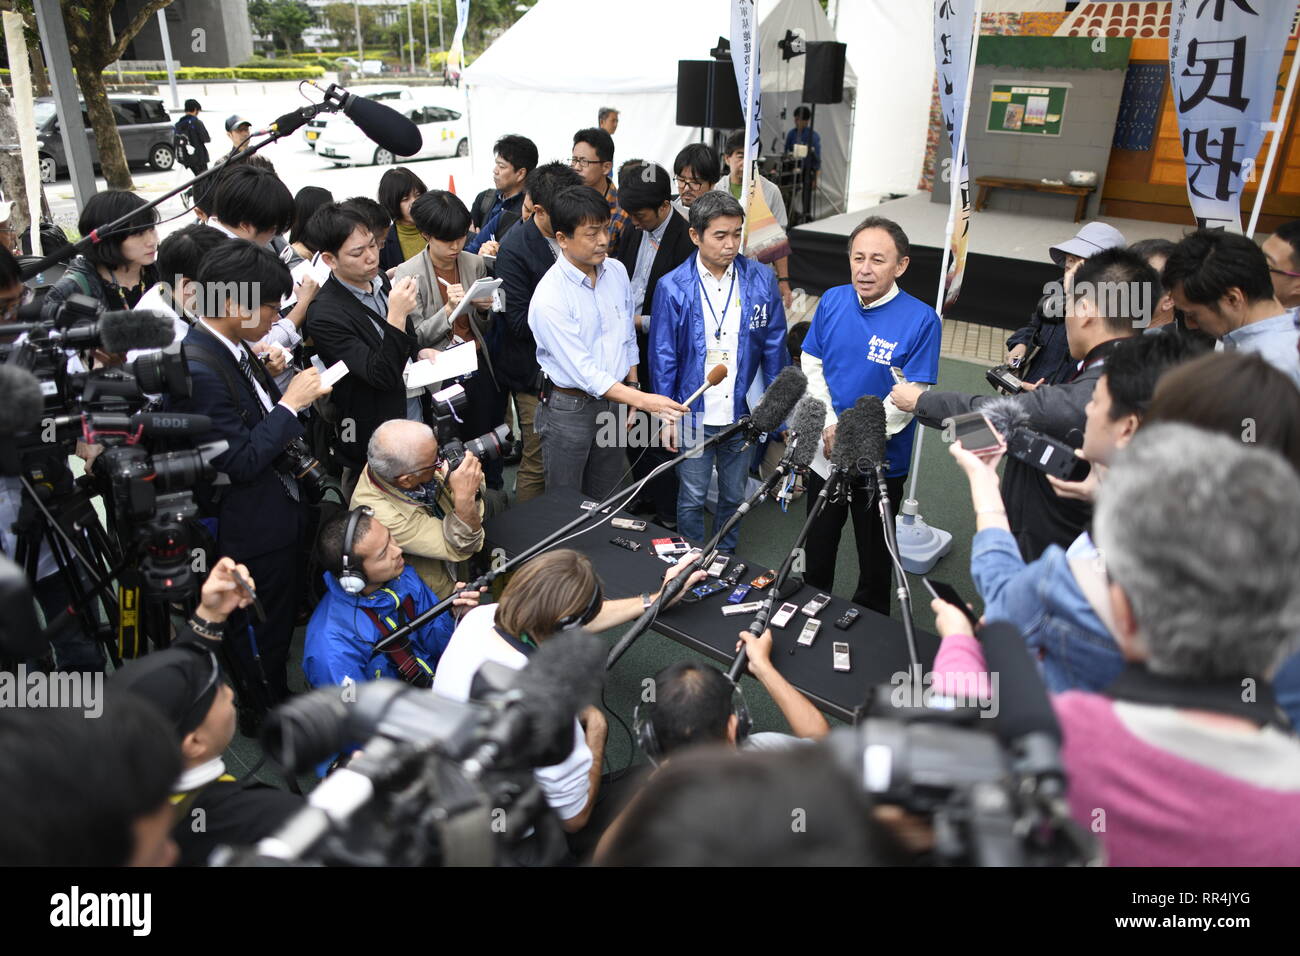 NAGO, JAPAN - FEBRUARY 23: Denny Tamaki (C), Governor of Okinawa prefecture, speak to press in Naha, on February 23, 2019. Okinawan residents casts their votes on from February 15 to 24, 2019 in a prefectural referendum on the controversial relocation of the US military base to a remote island of Henoko. (Photo by Richard Atrero de Guzman/ Aflo) Stock Photo